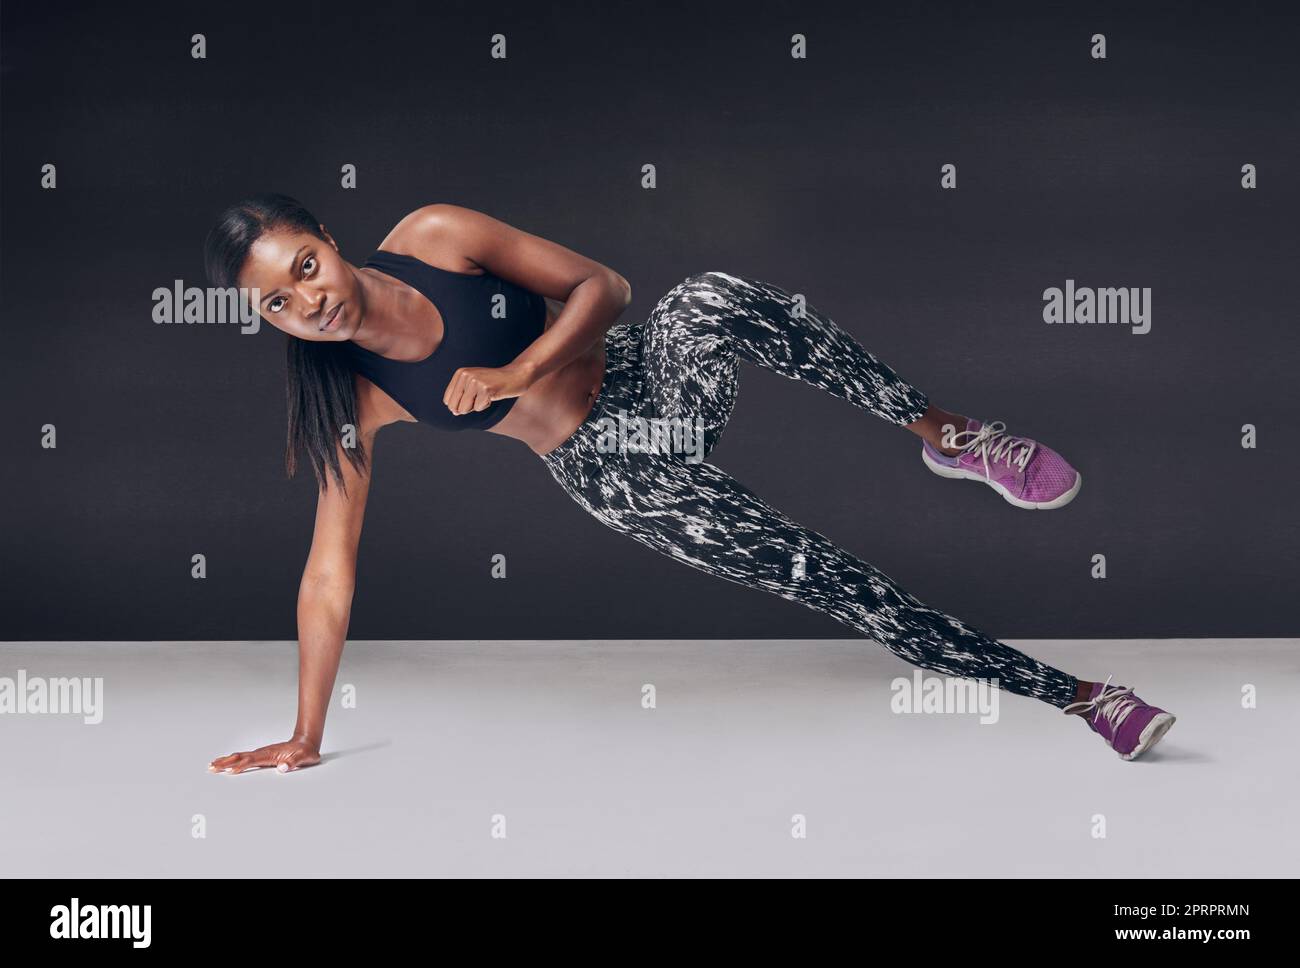 Young woman doing push-ups on a dark background. Studio shot